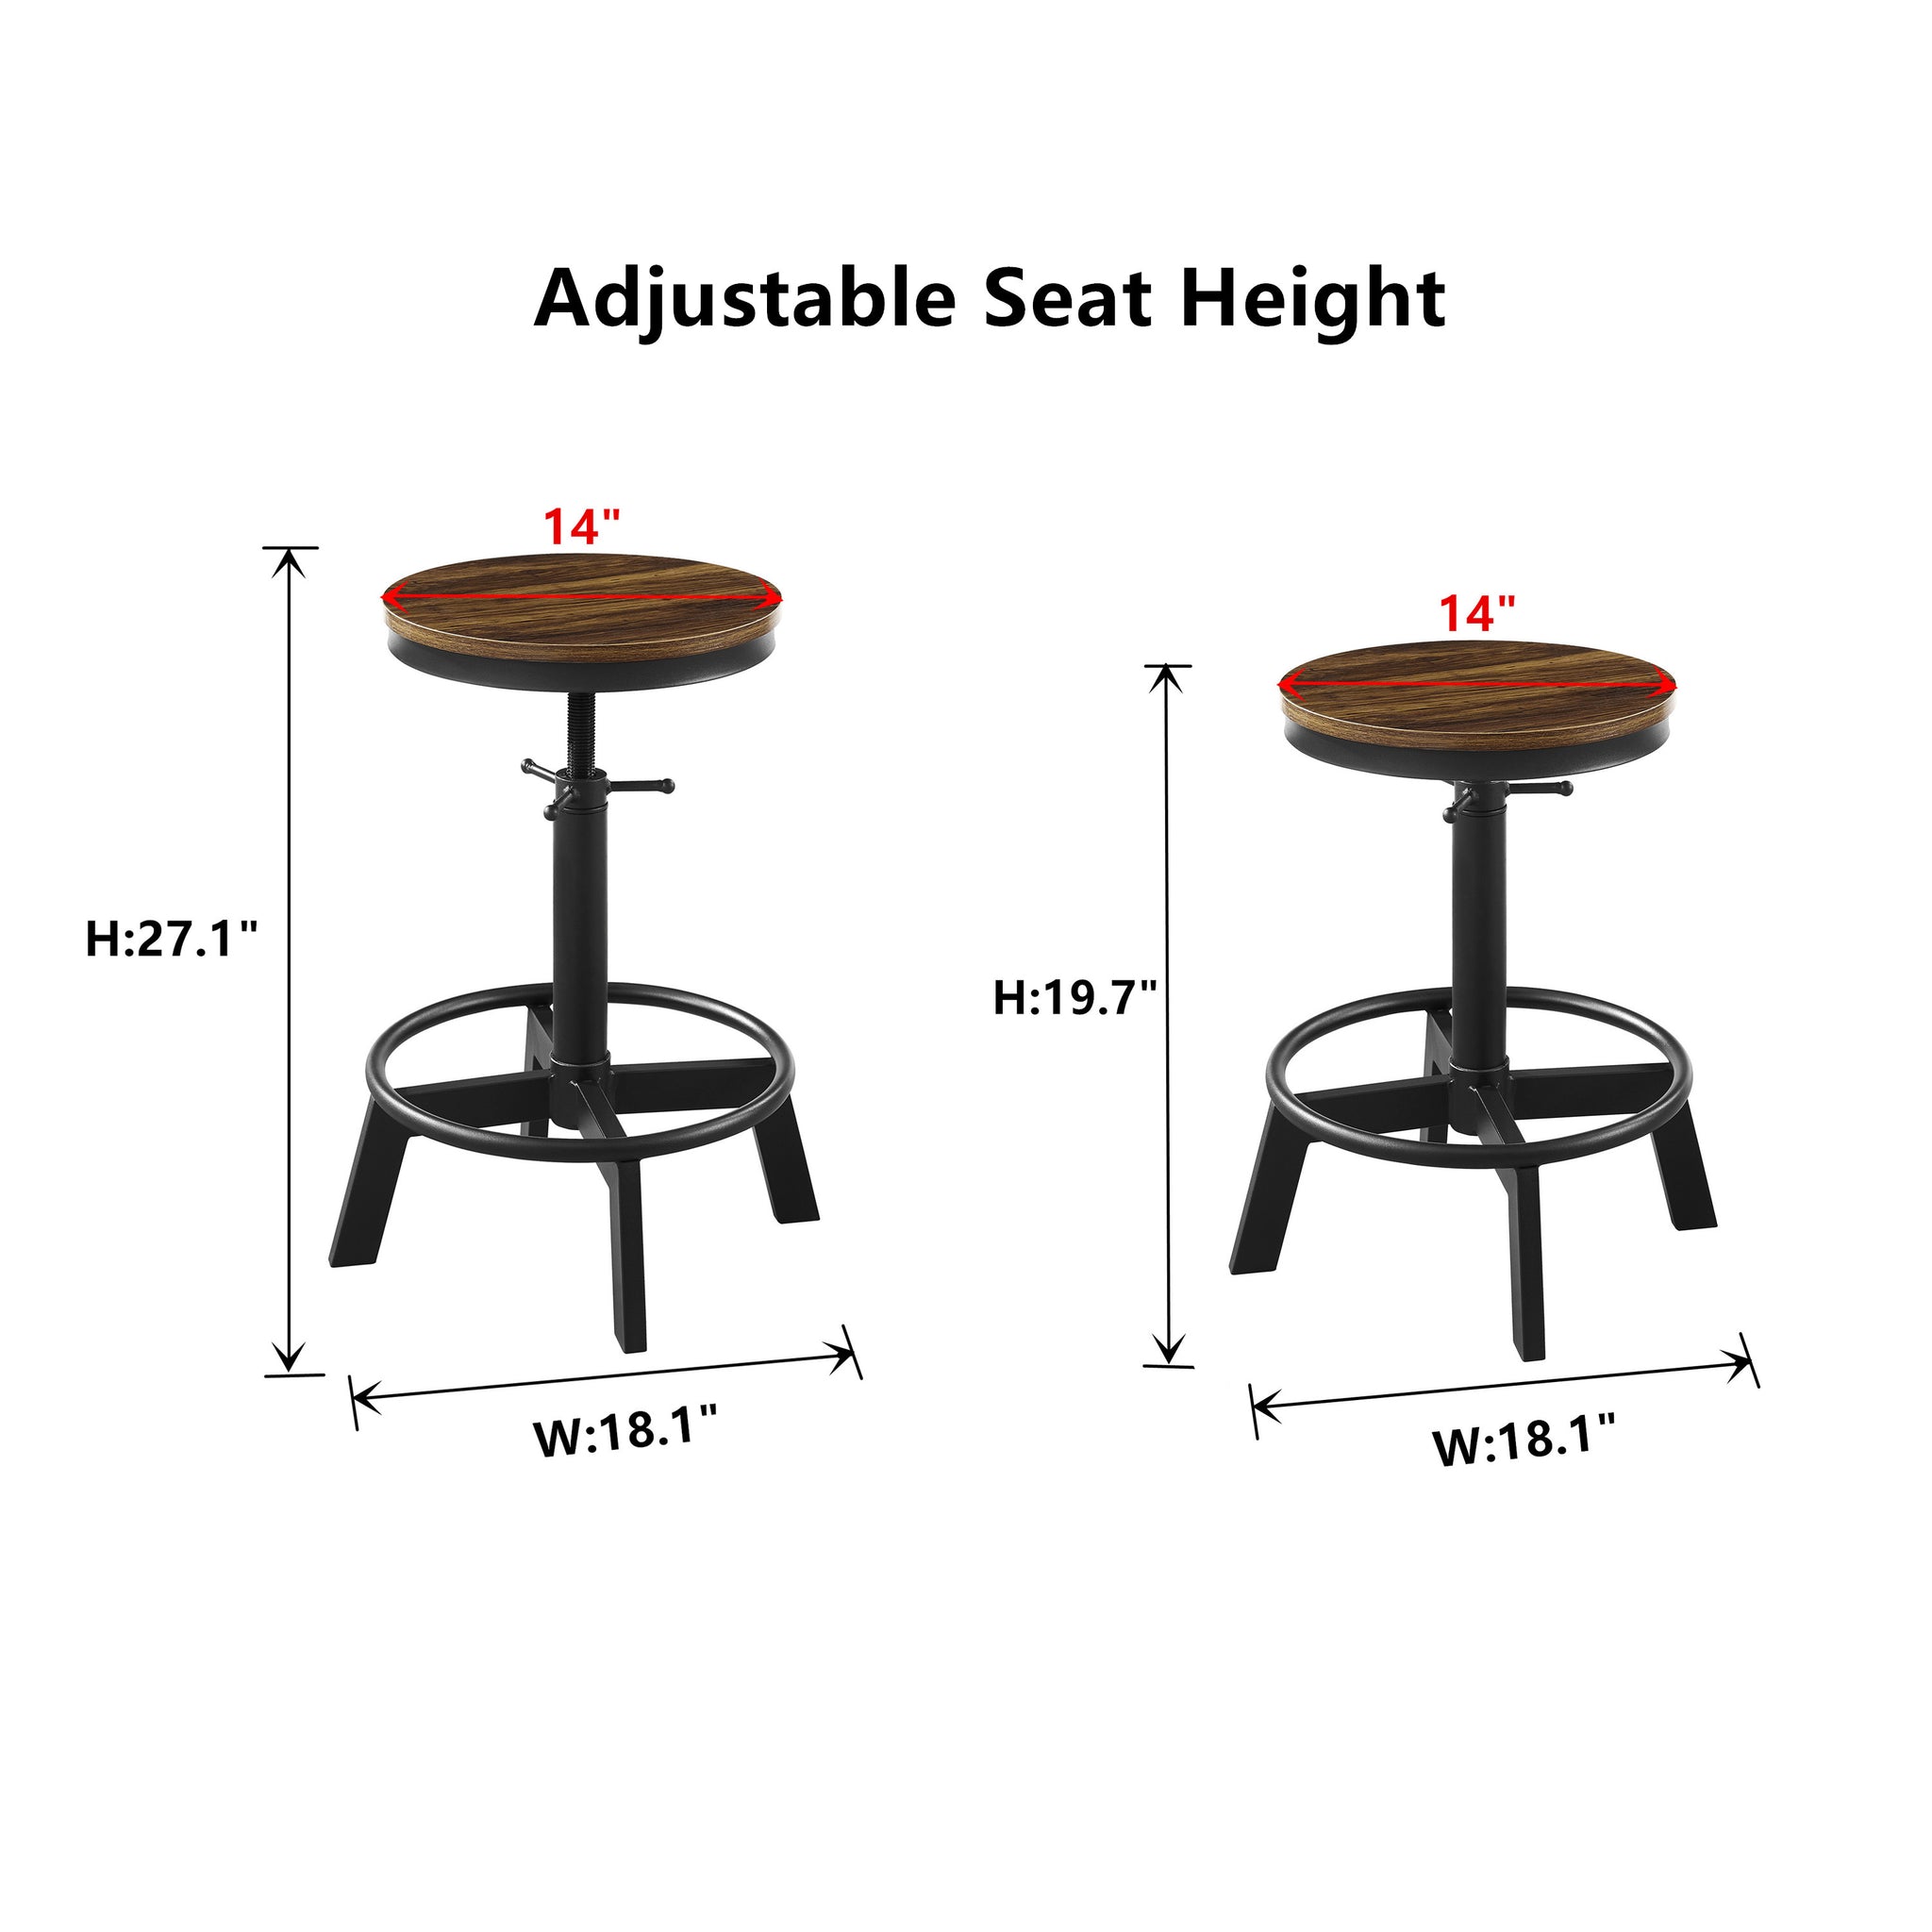 Vintage Adjustable Bar Stools Set of 2, Industrial 19.7-27.1 Inch Round Solid Wood and Metal Bar Stools for Kitchen Dining Counter, Retro Brown